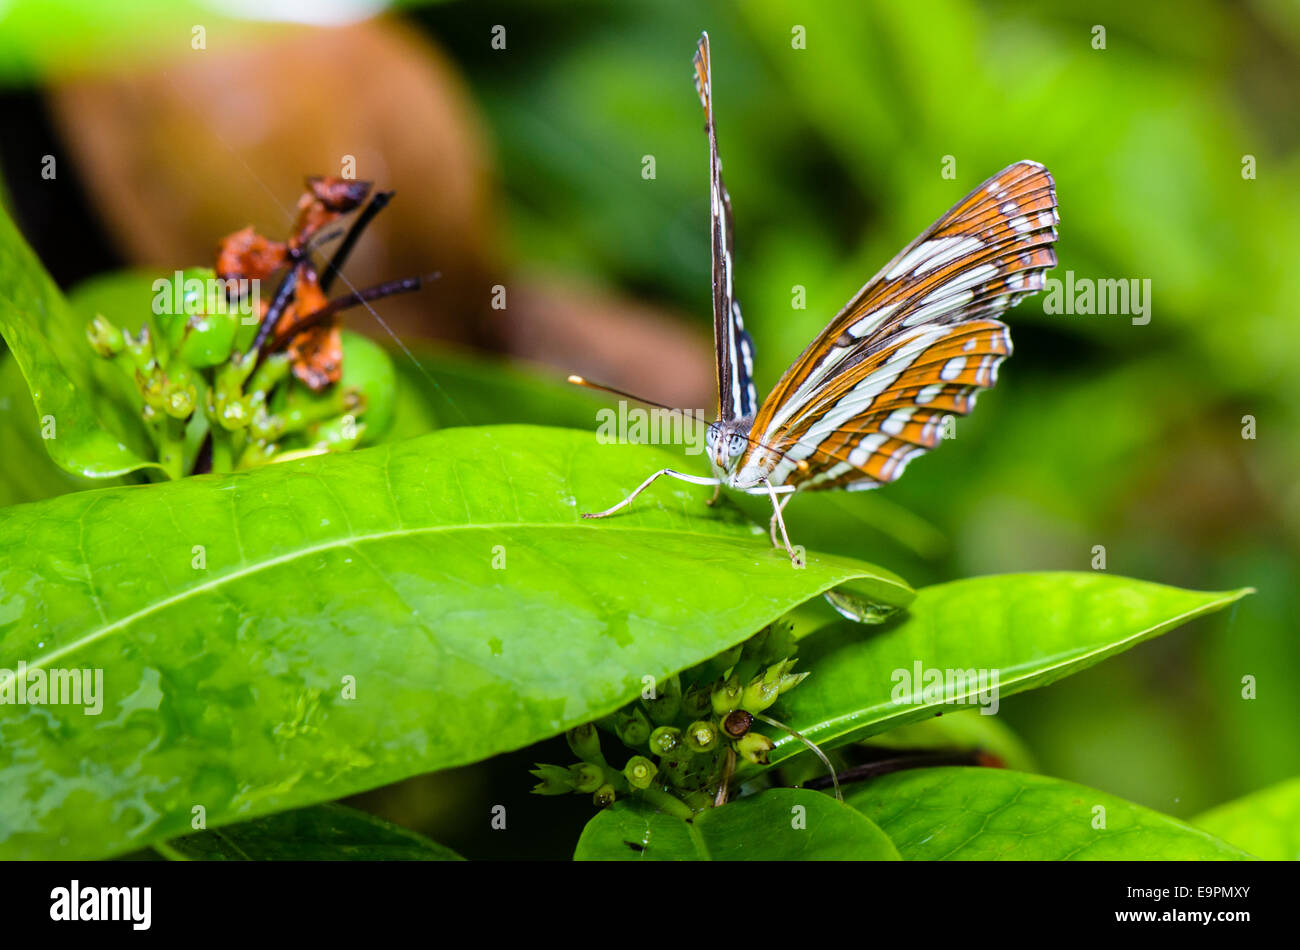 Common Sailor (Neptis hylas papaja) butterfly resting on a leaves in Thailand Stock Photo